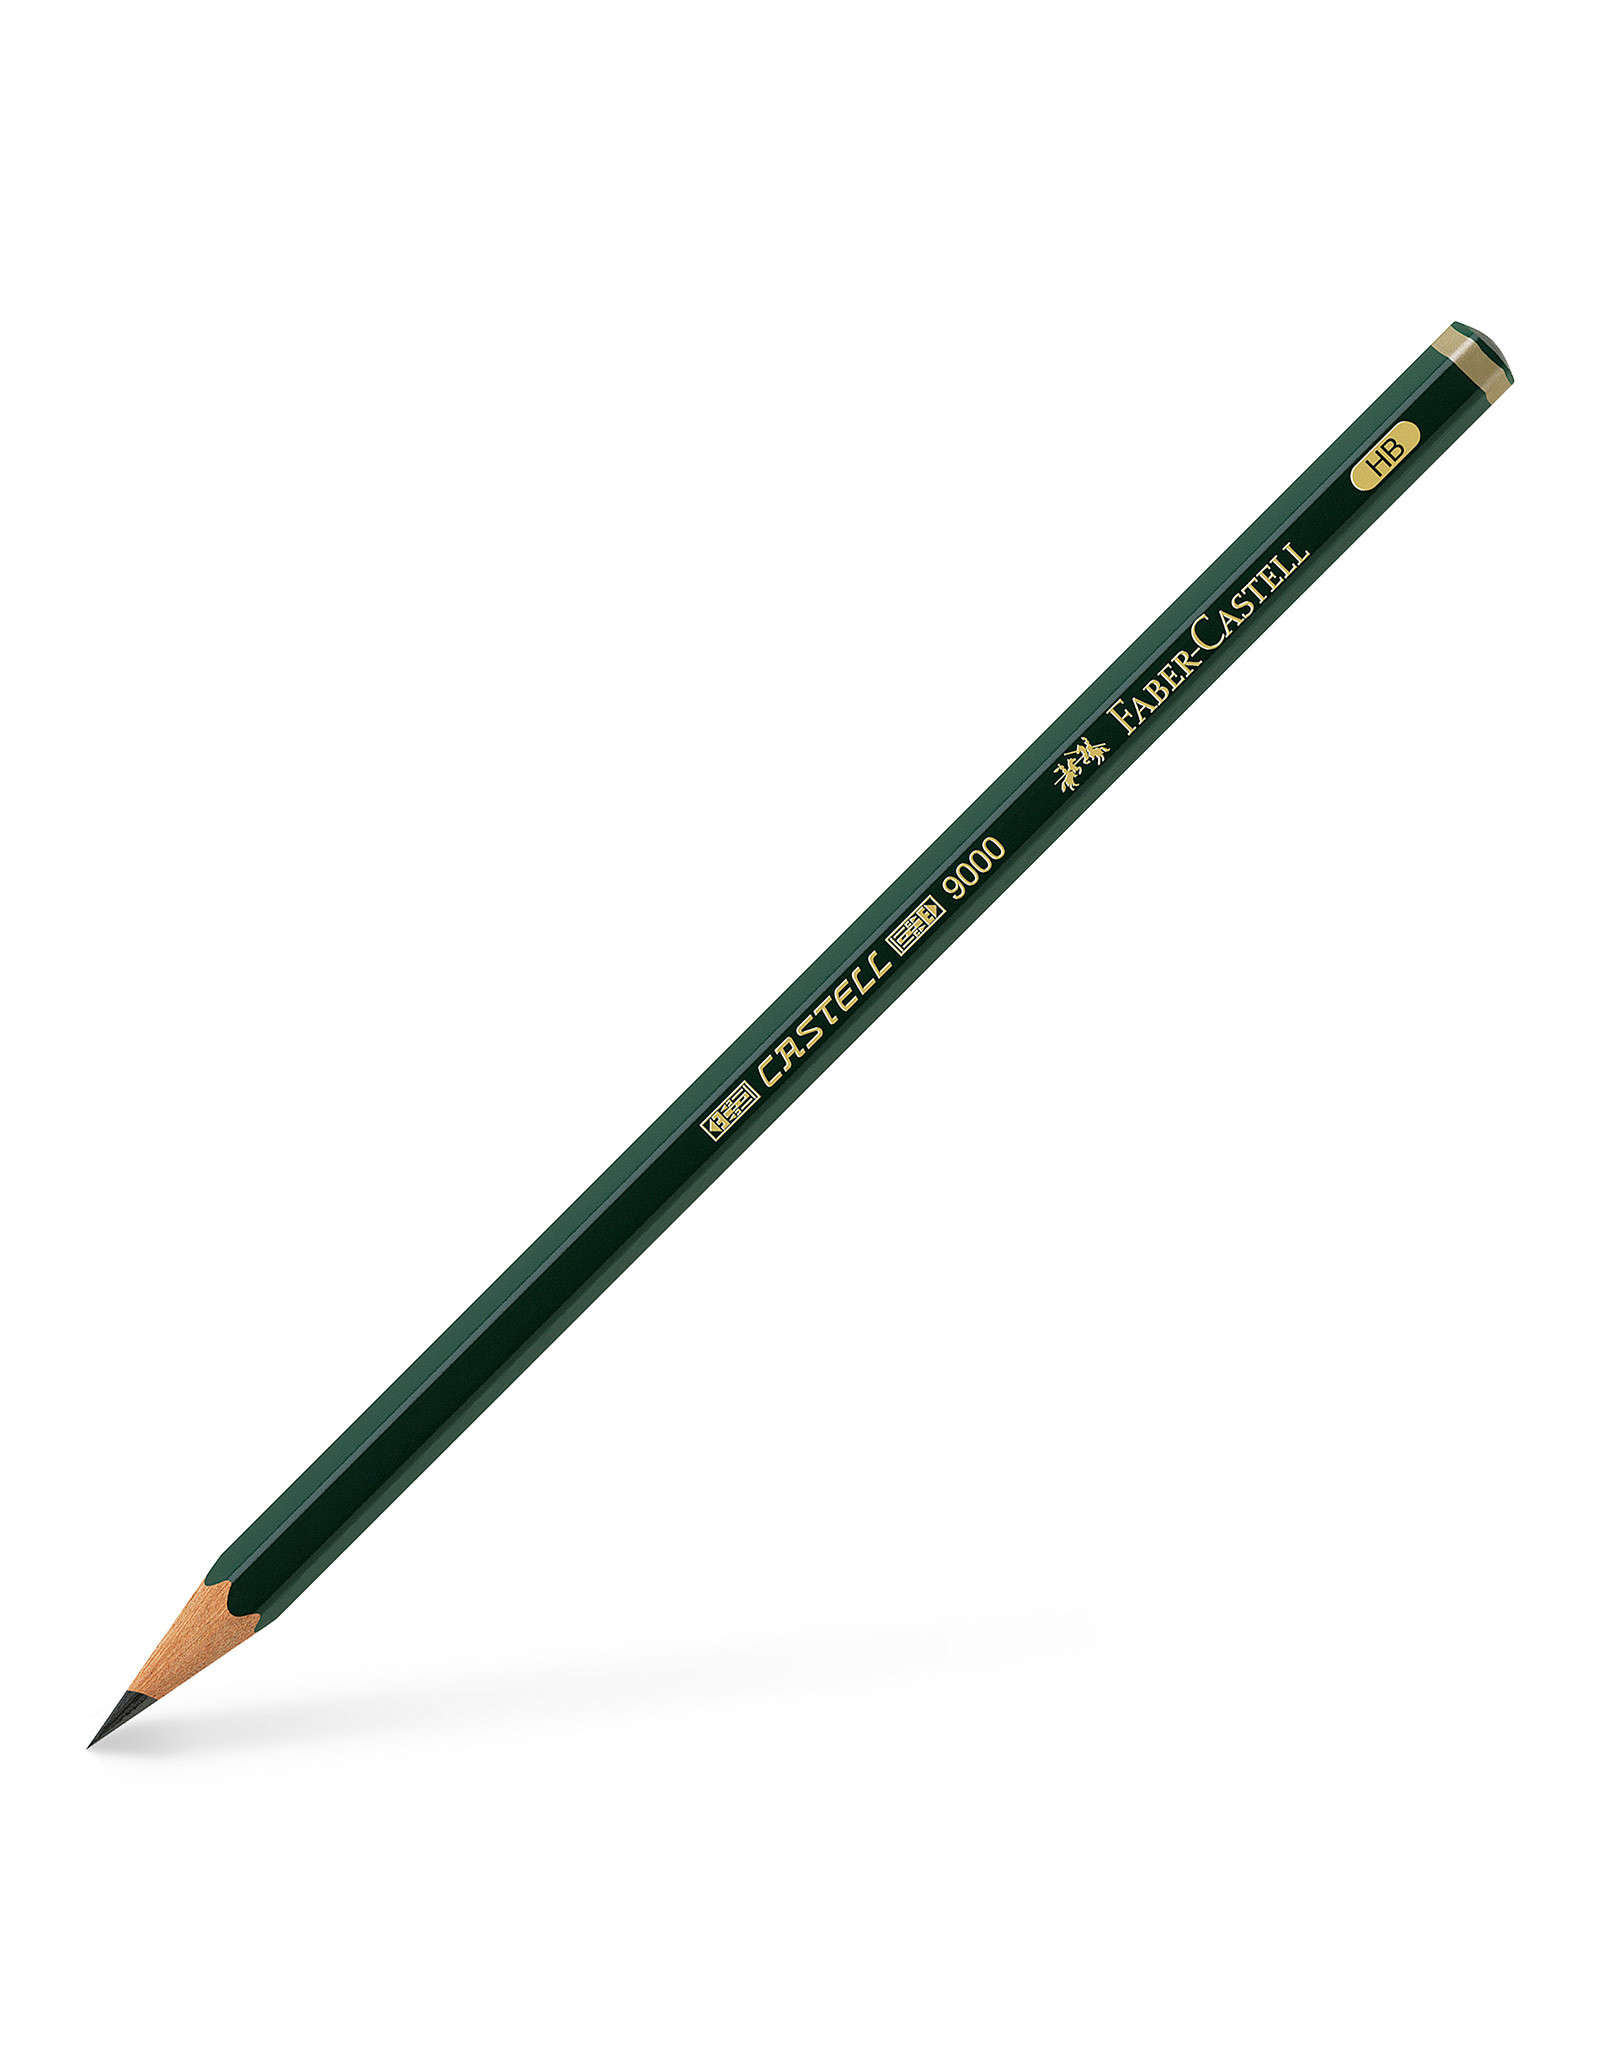 FABER-CASTELL Castell® 9000 Graphite Pencil, HB